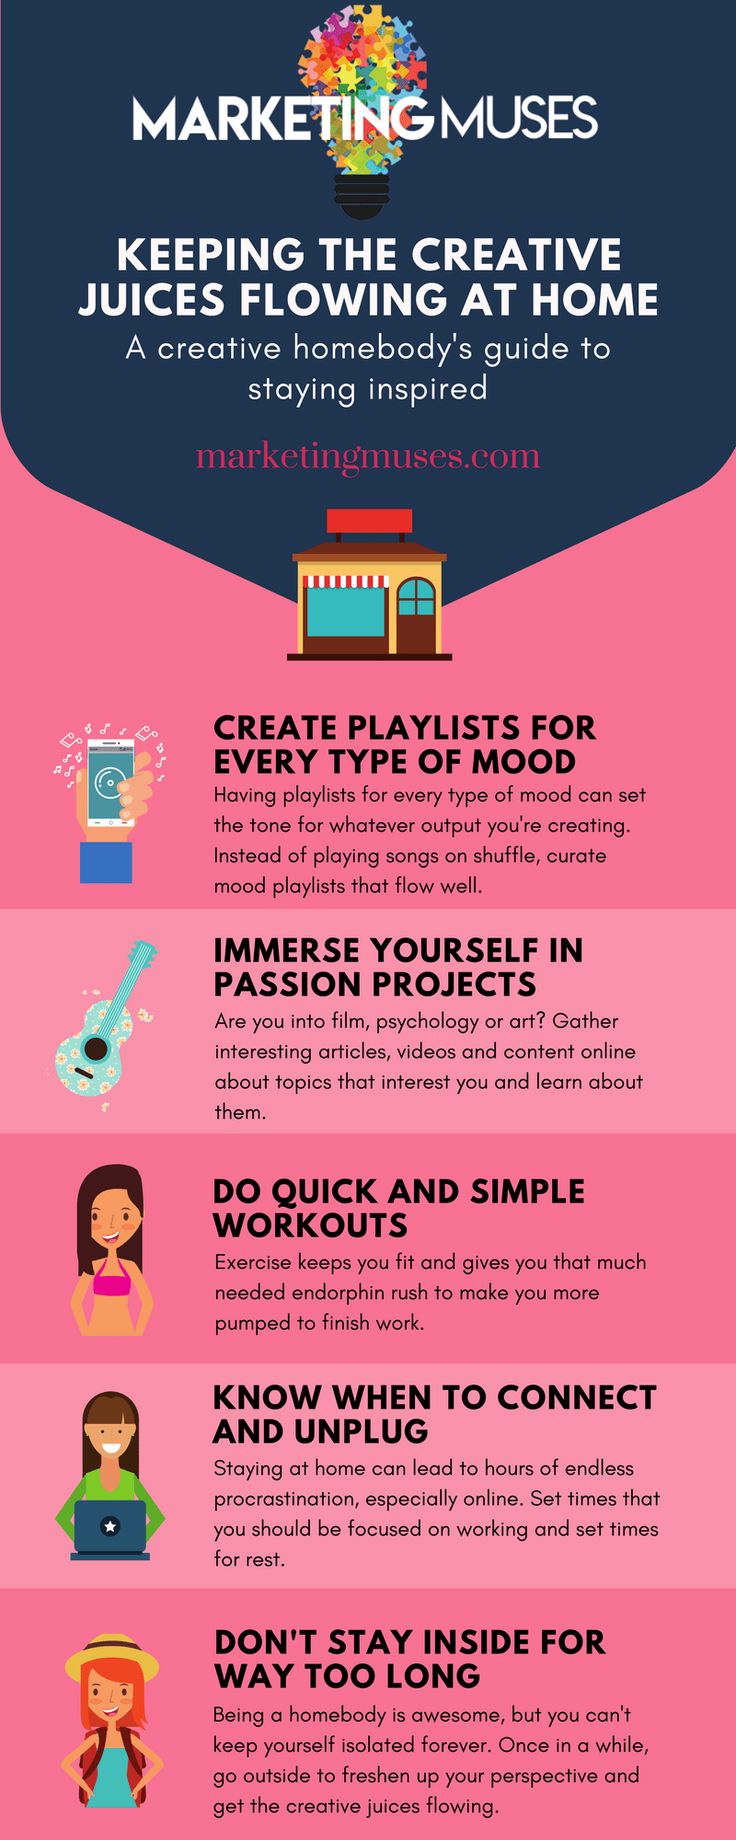 Psychology-Infographic-Keeping-The-Creative-Juices-Flowing-at-Home Psychology Infographic : Keeping The Creative Juices Flowing at Home: A Creative Homebody's Guide to Stay...